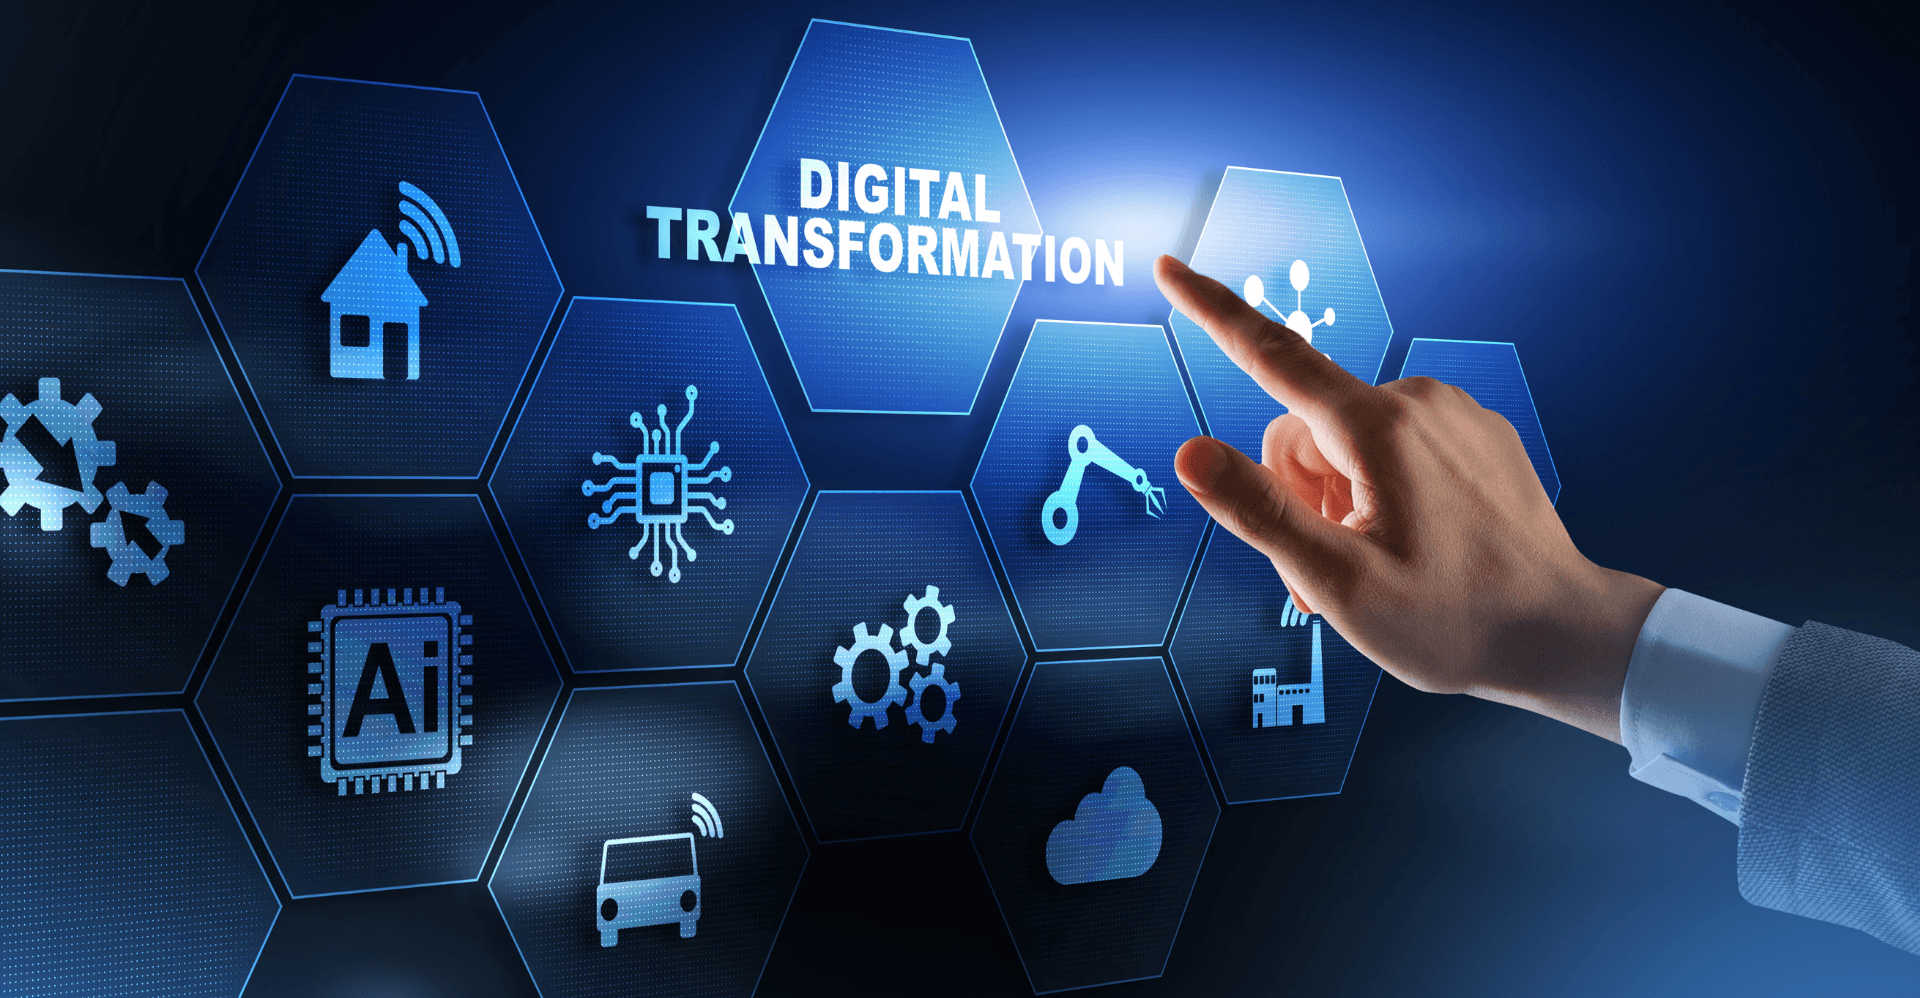 What digital transformation questions do you have after looking at this picture? The picture illustrates what types of technologies are associated with digital transformation.